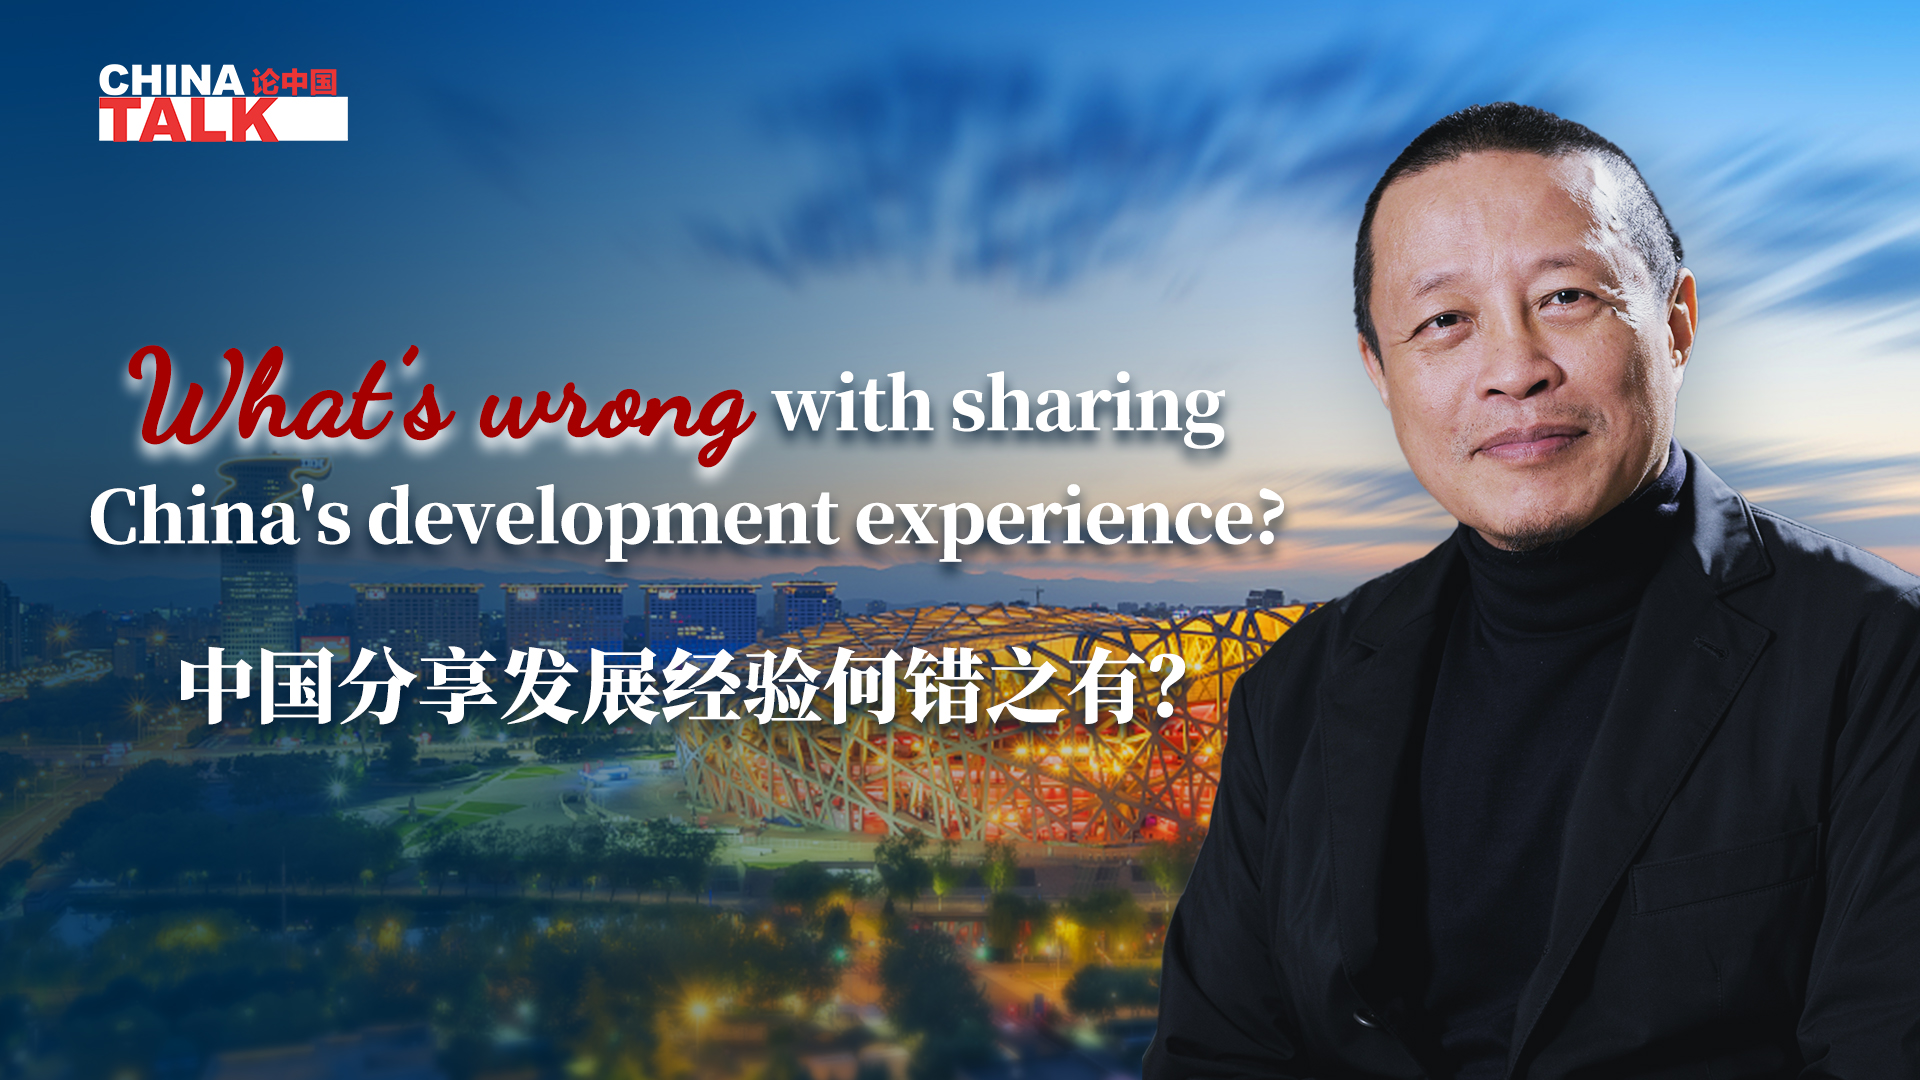 Why is sharing China’s development experience problematic?